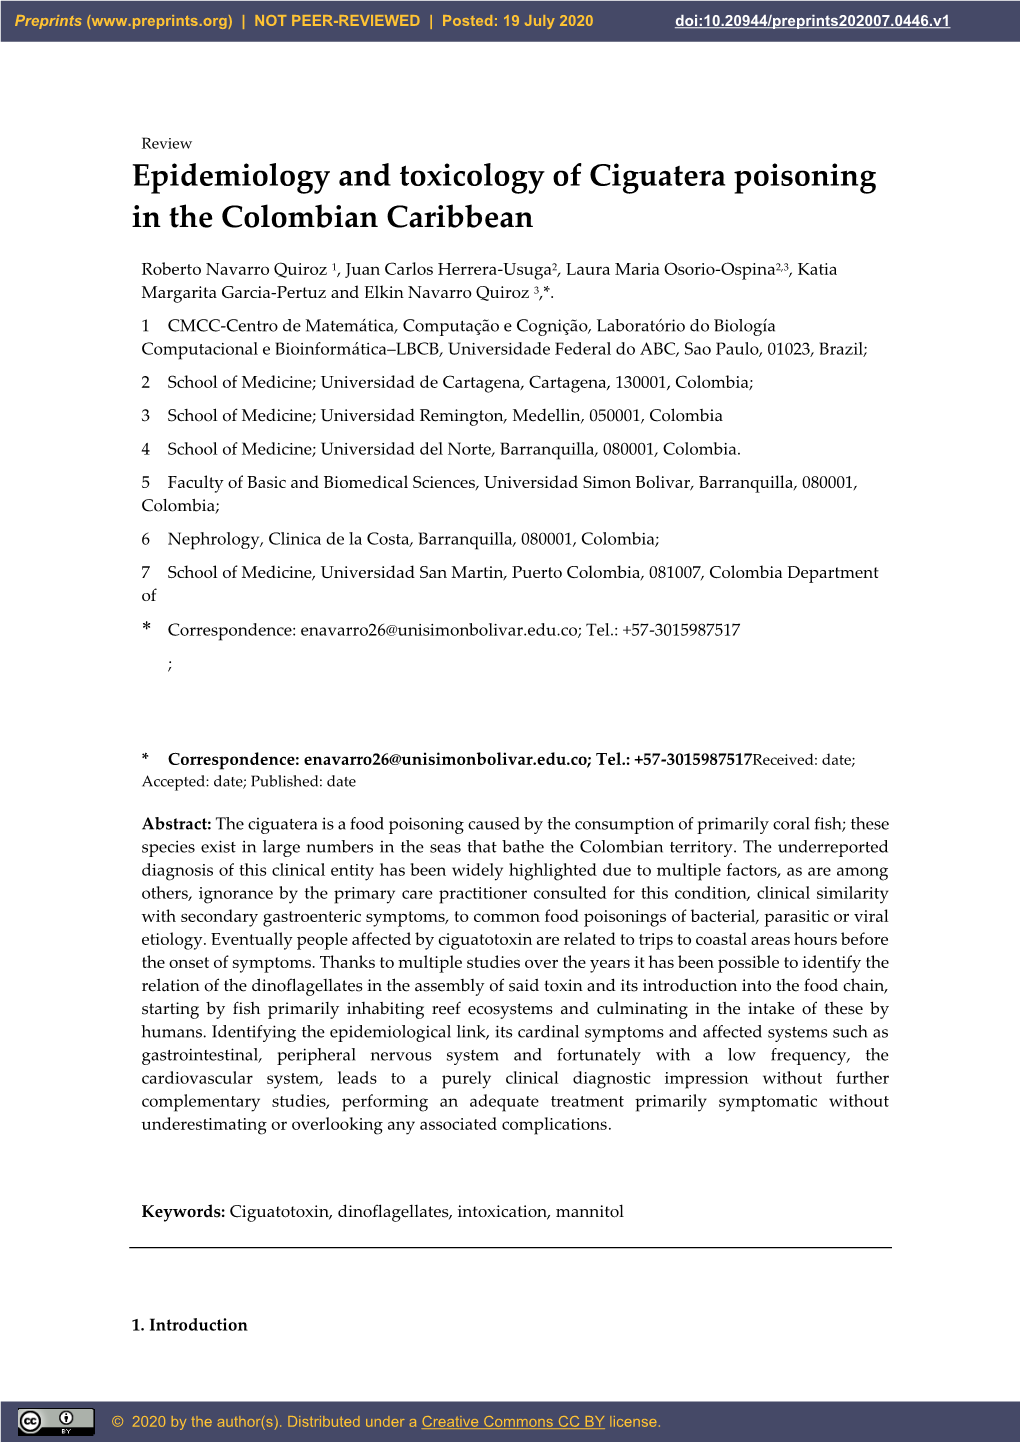 Epidemiology and Toxicology of Ciguatera Poisoning in the Colombian Caribbean